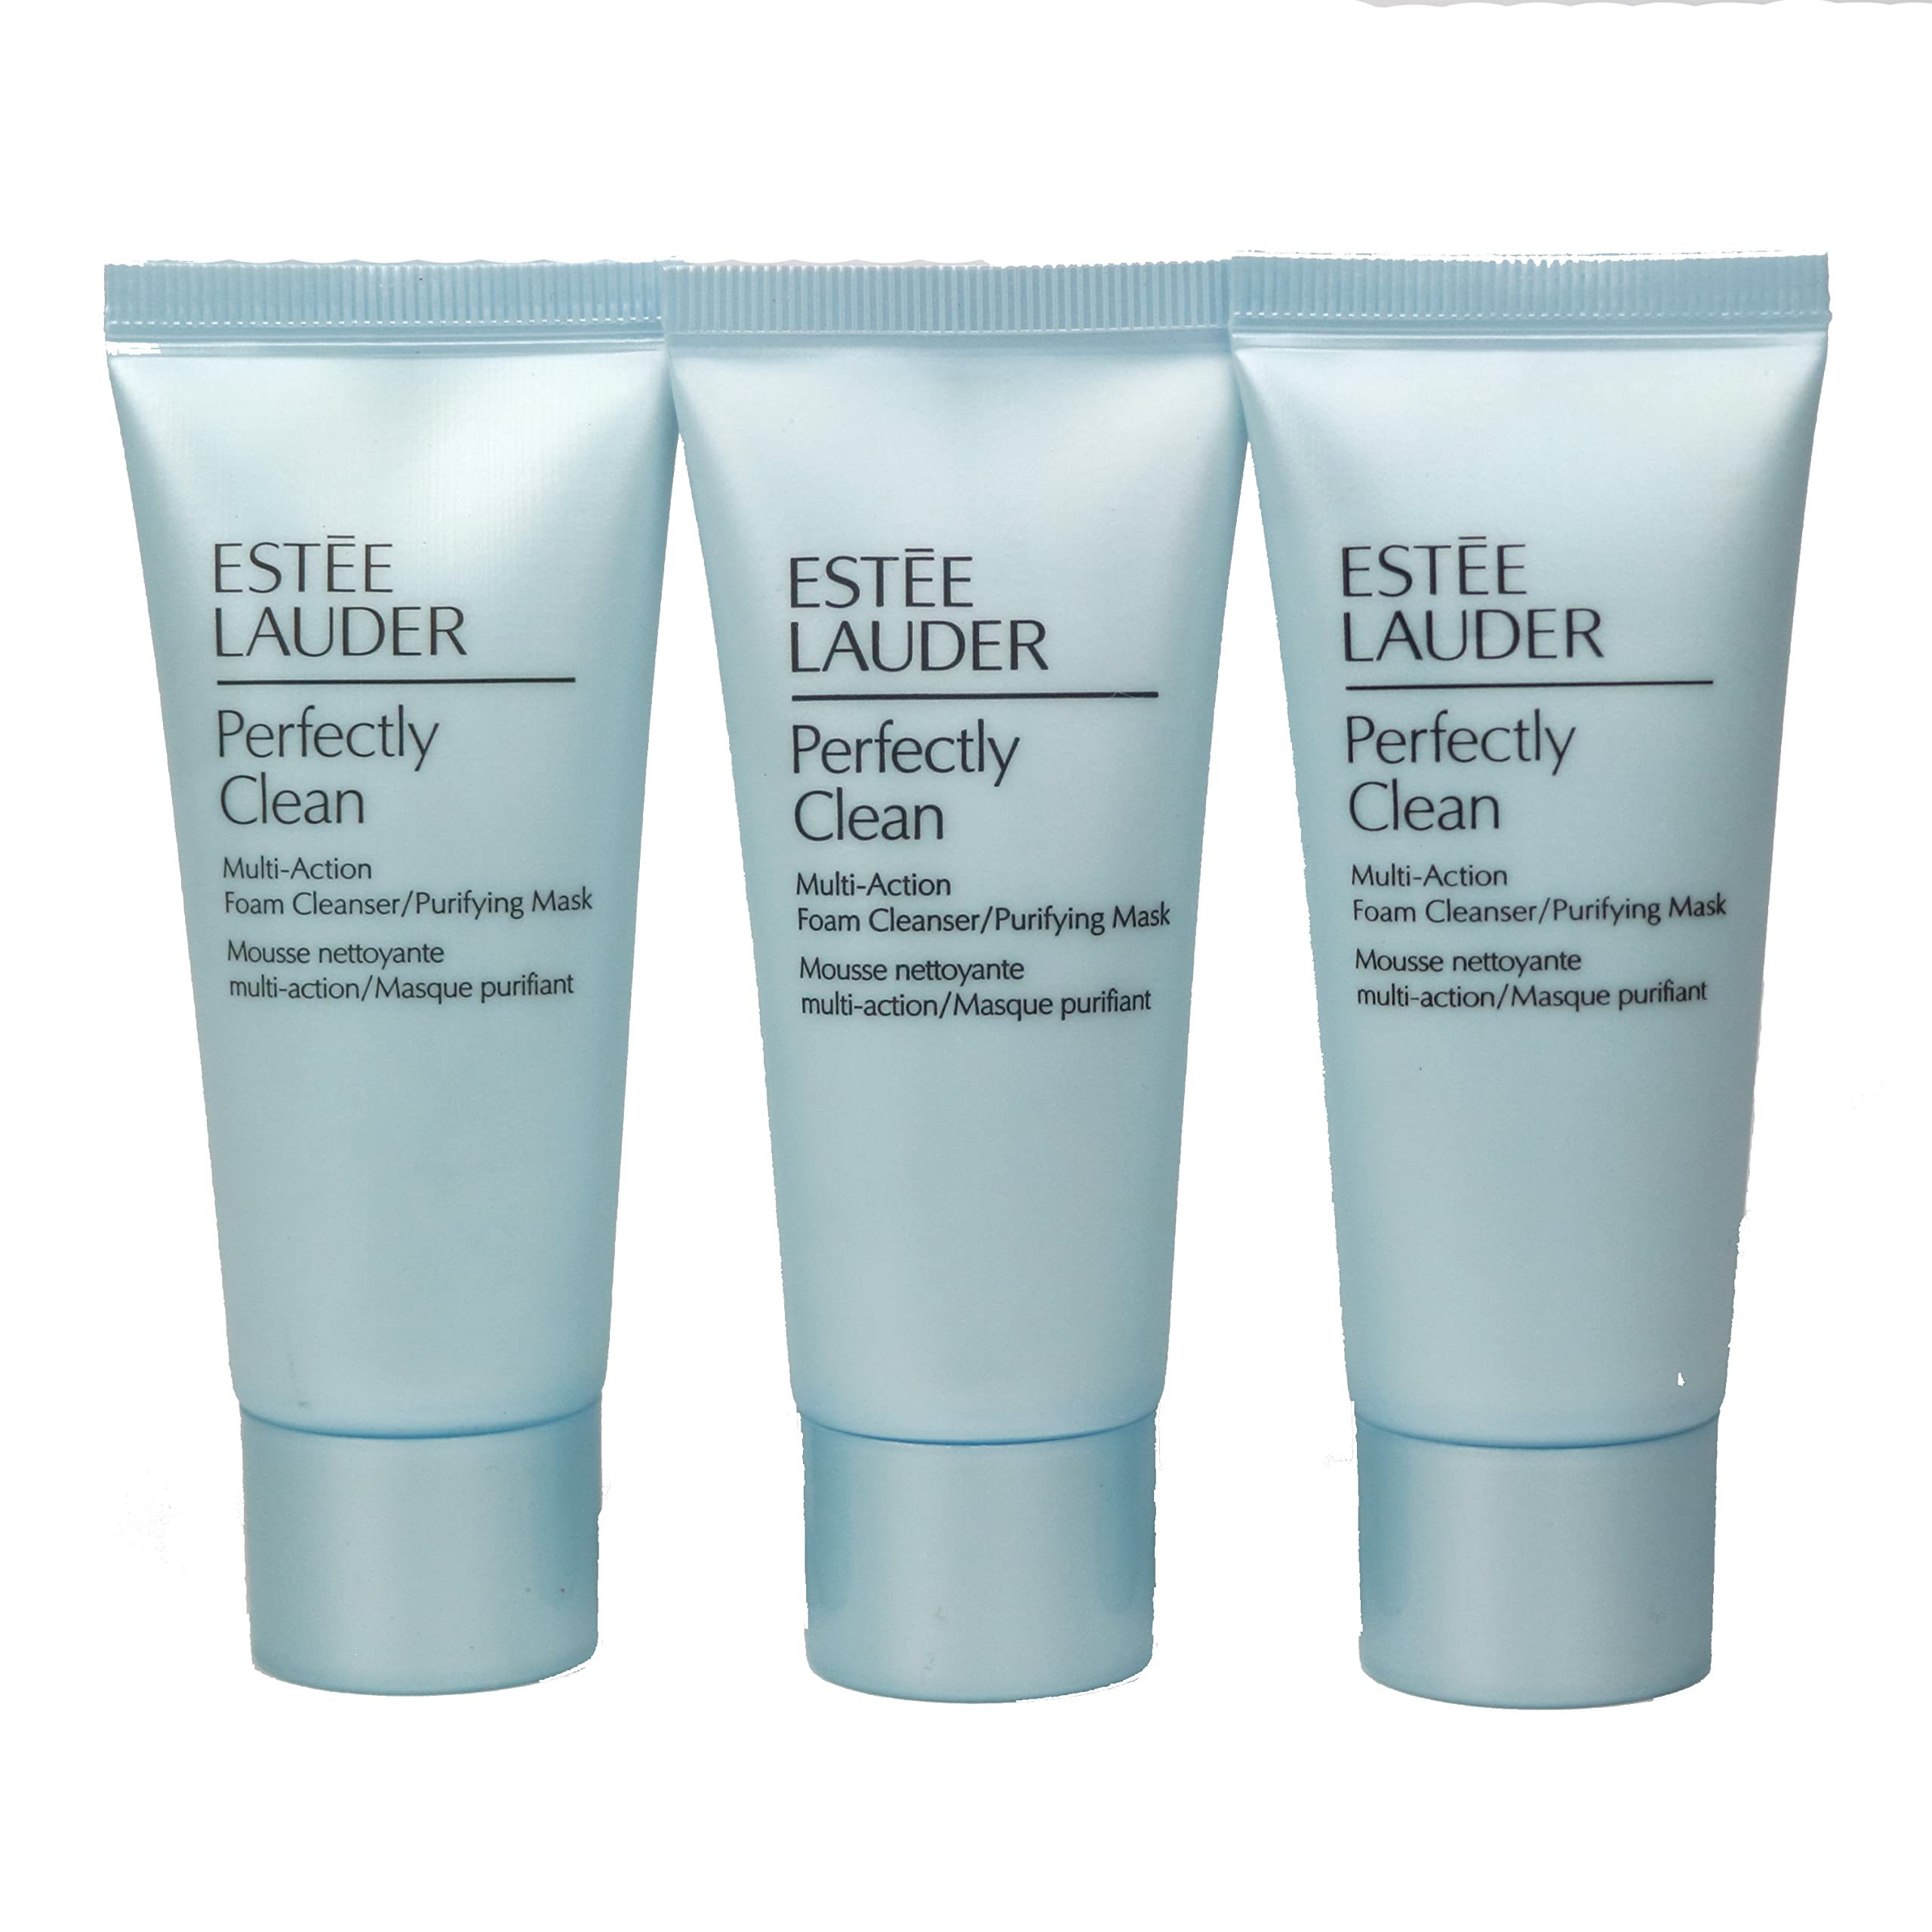 Pack of Estee Lauder Perfectly Clean Multi-Action Foam Cleanser/Purifying Mask, 1